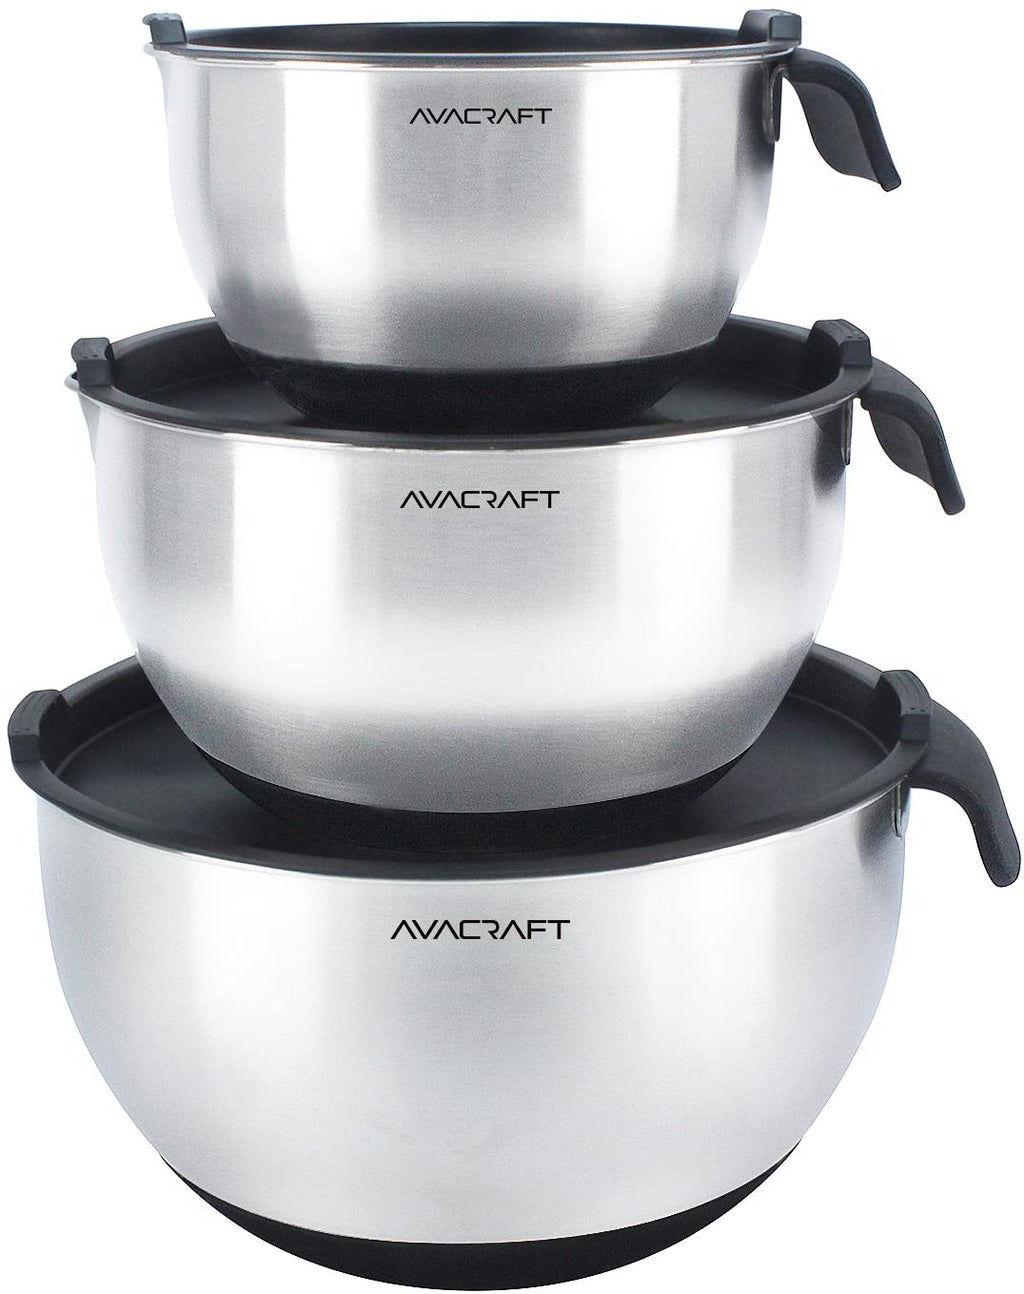 Rorence Stainless Steel Non-Slip Mixing Bowls with Pour Spout Handle and Lid Set of 3 Black